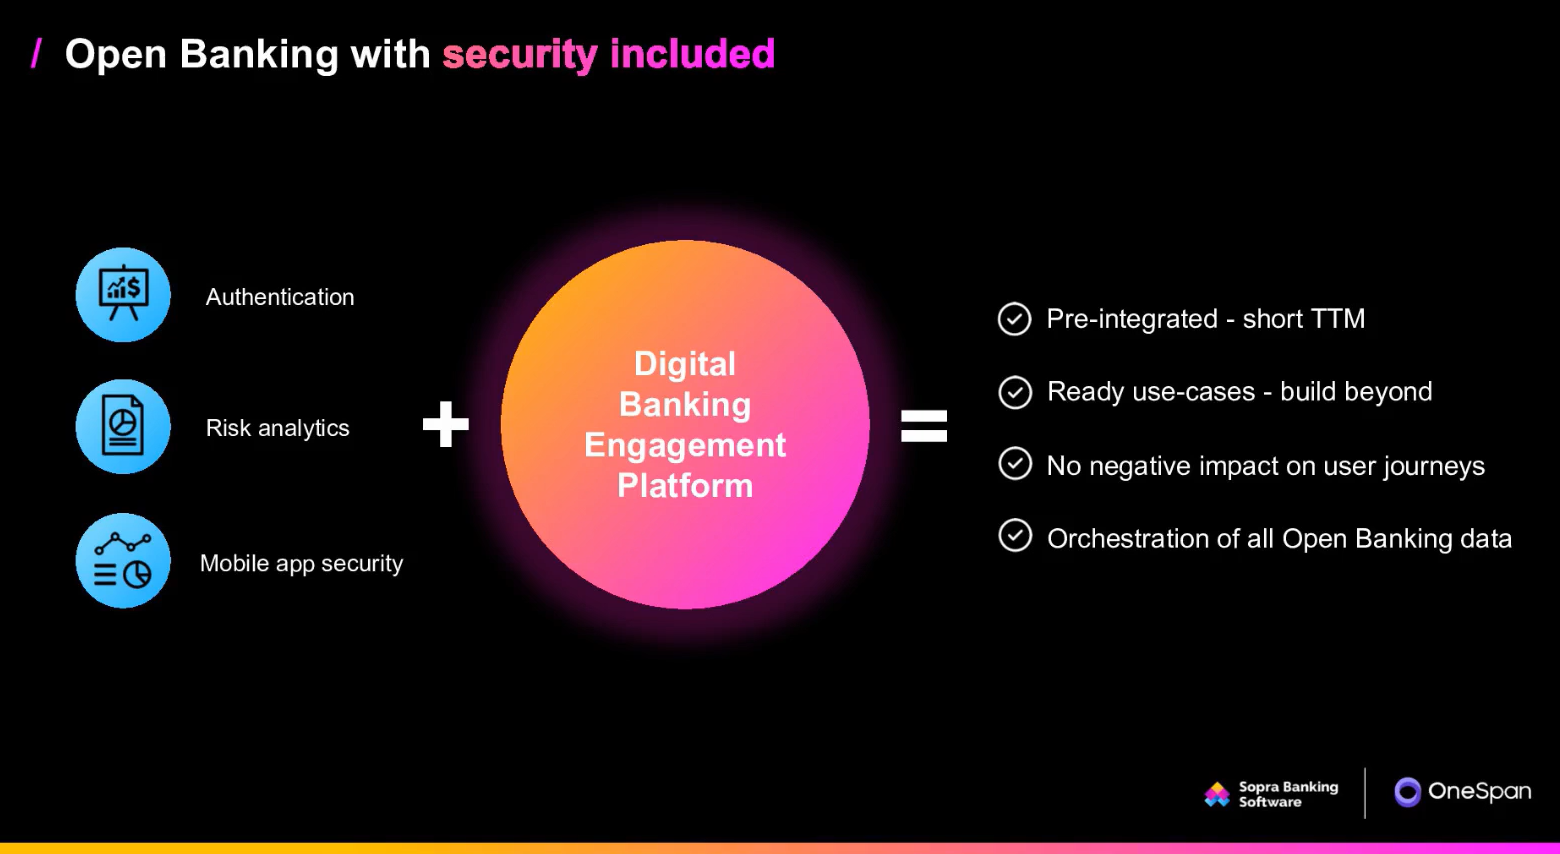 Graphic: Open Banking with security included